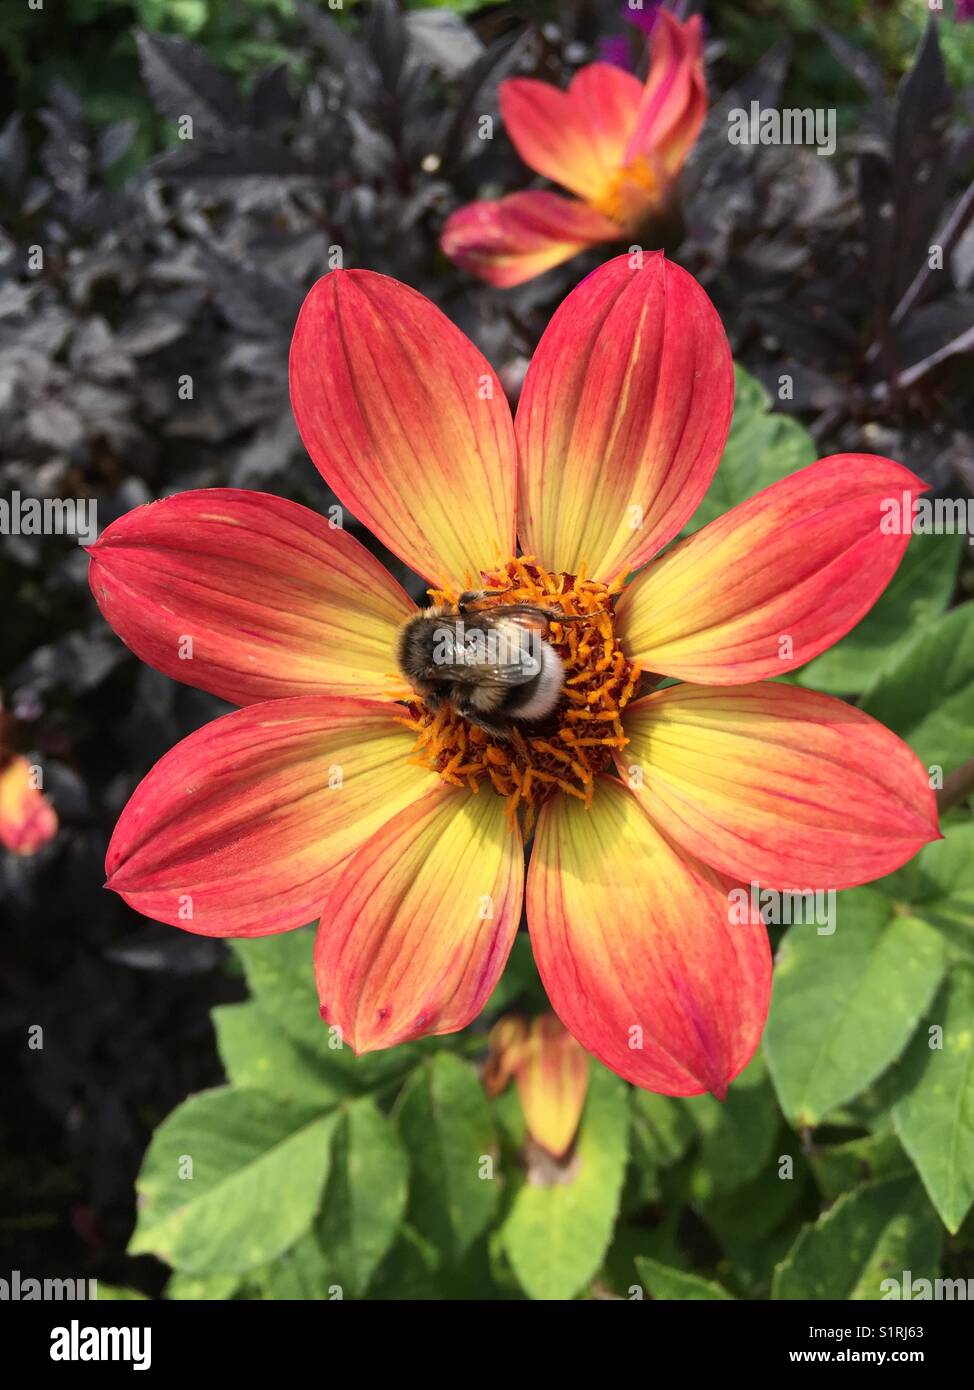 Single flowered Dahlia with red and yellow petals with bee against green foliage Stock Photo